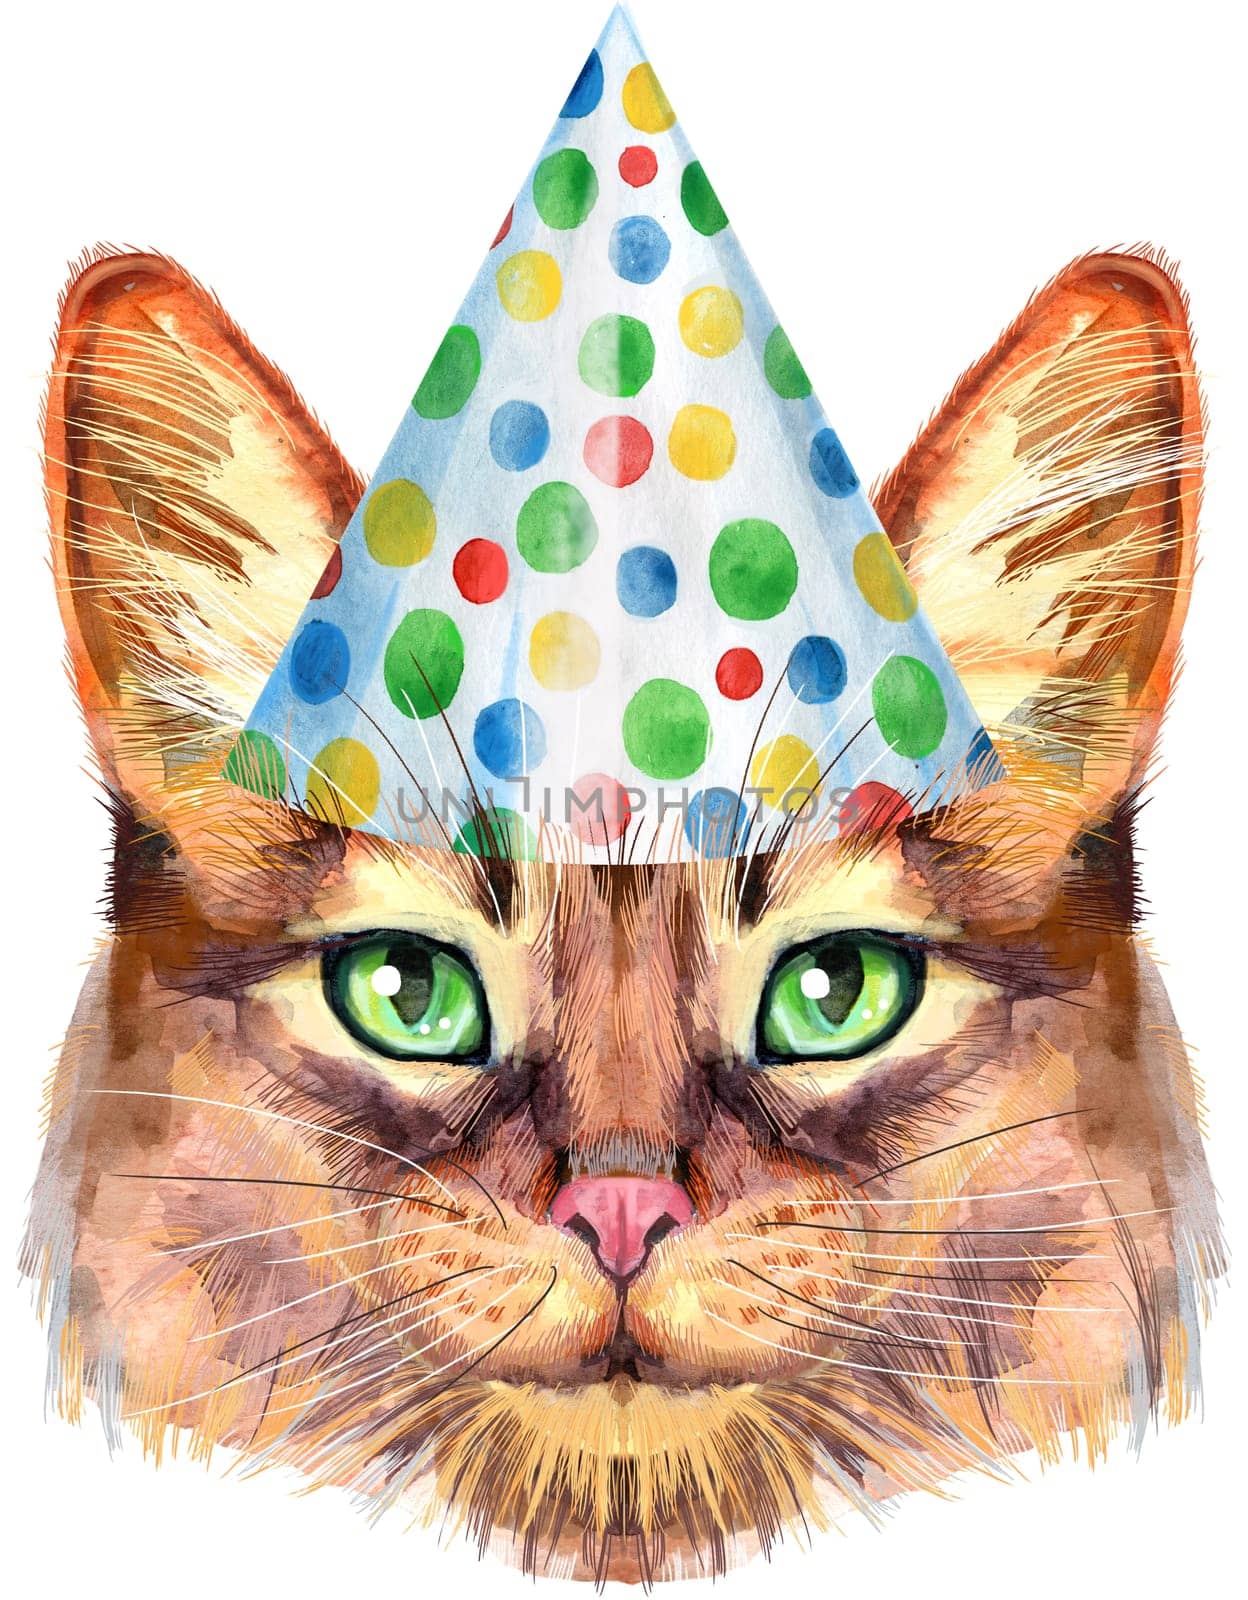 Cute cat in party hat. Cat for t-shirt graphics. Watercolor Somali cat breed illustration